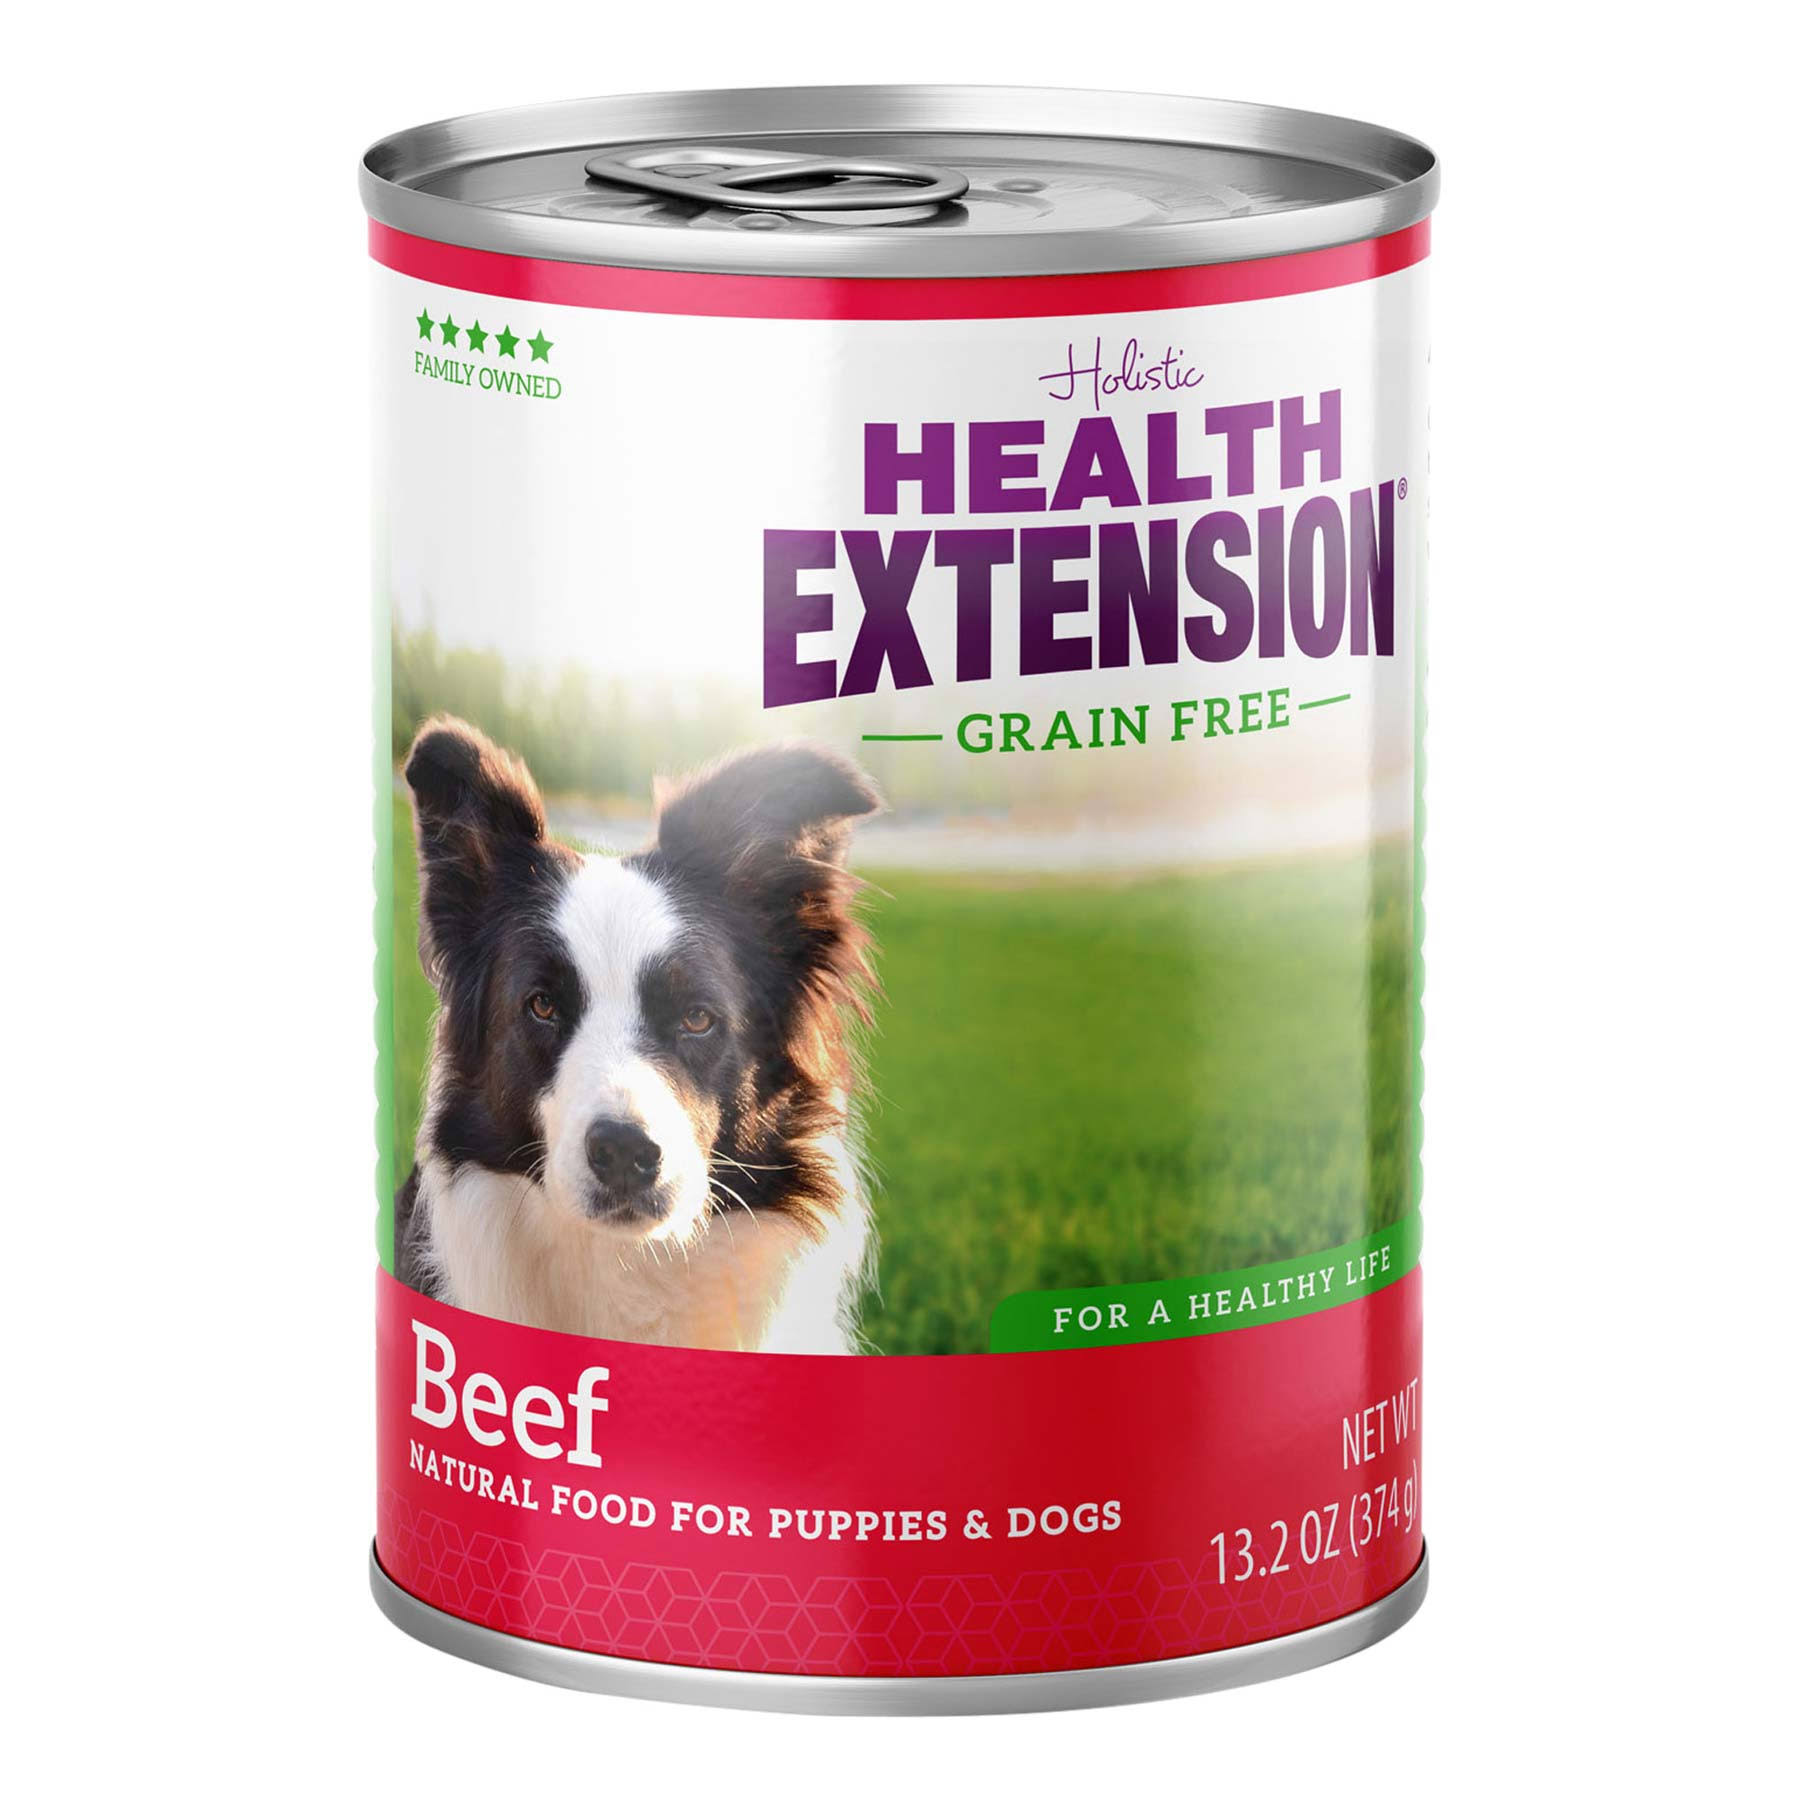 Health Extension Meaty Mix Beef Canned Dog Food 13.2oz